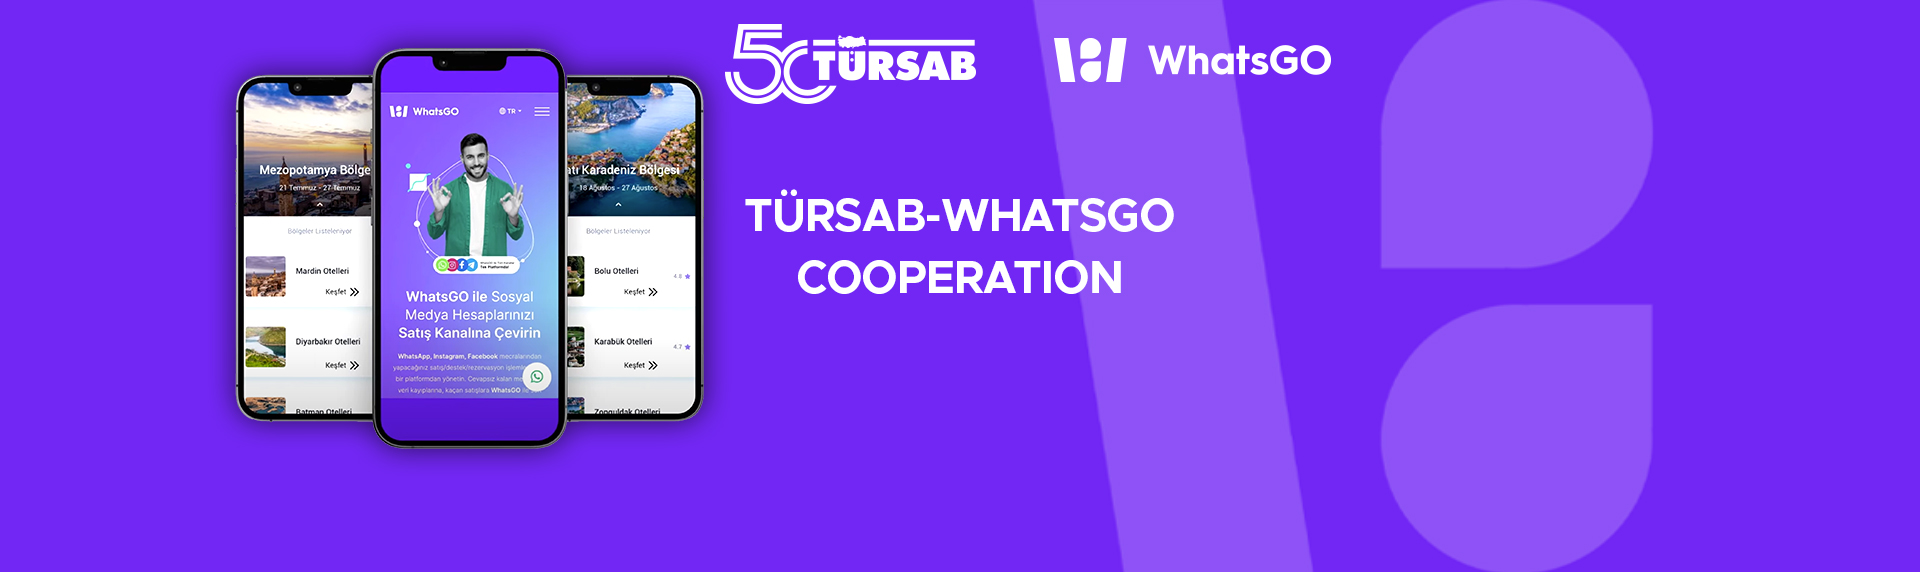 https://www.tursab.org.tr/announcements/digital-transformation-in-tourism-continues-with-whatsgo-tursab-cooperation